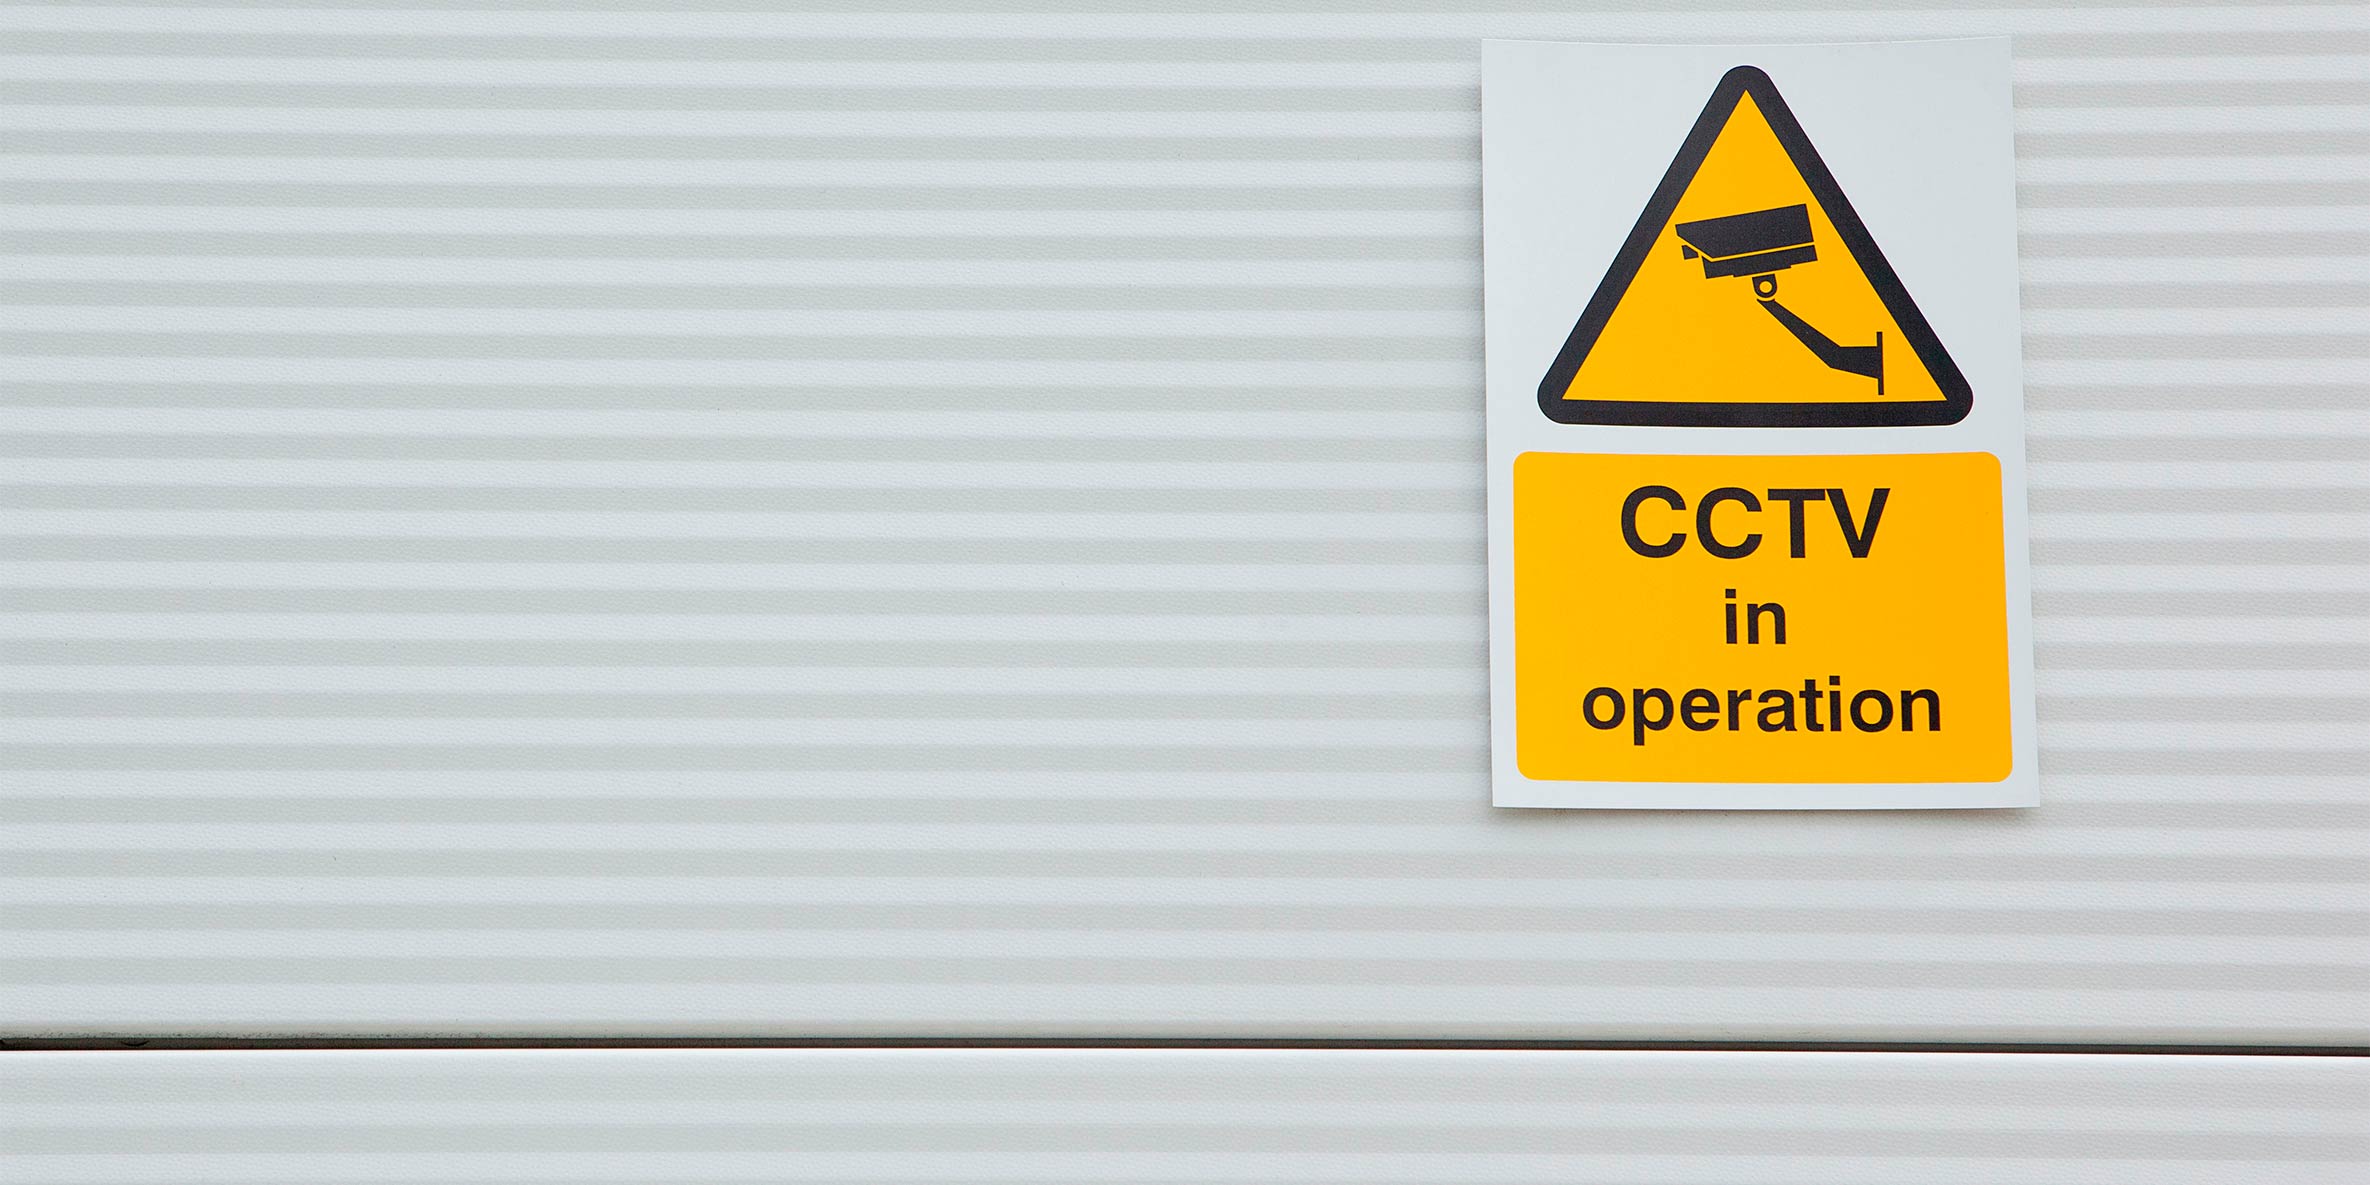 Does Business Security Signage Prevent Theft and Vandalism?